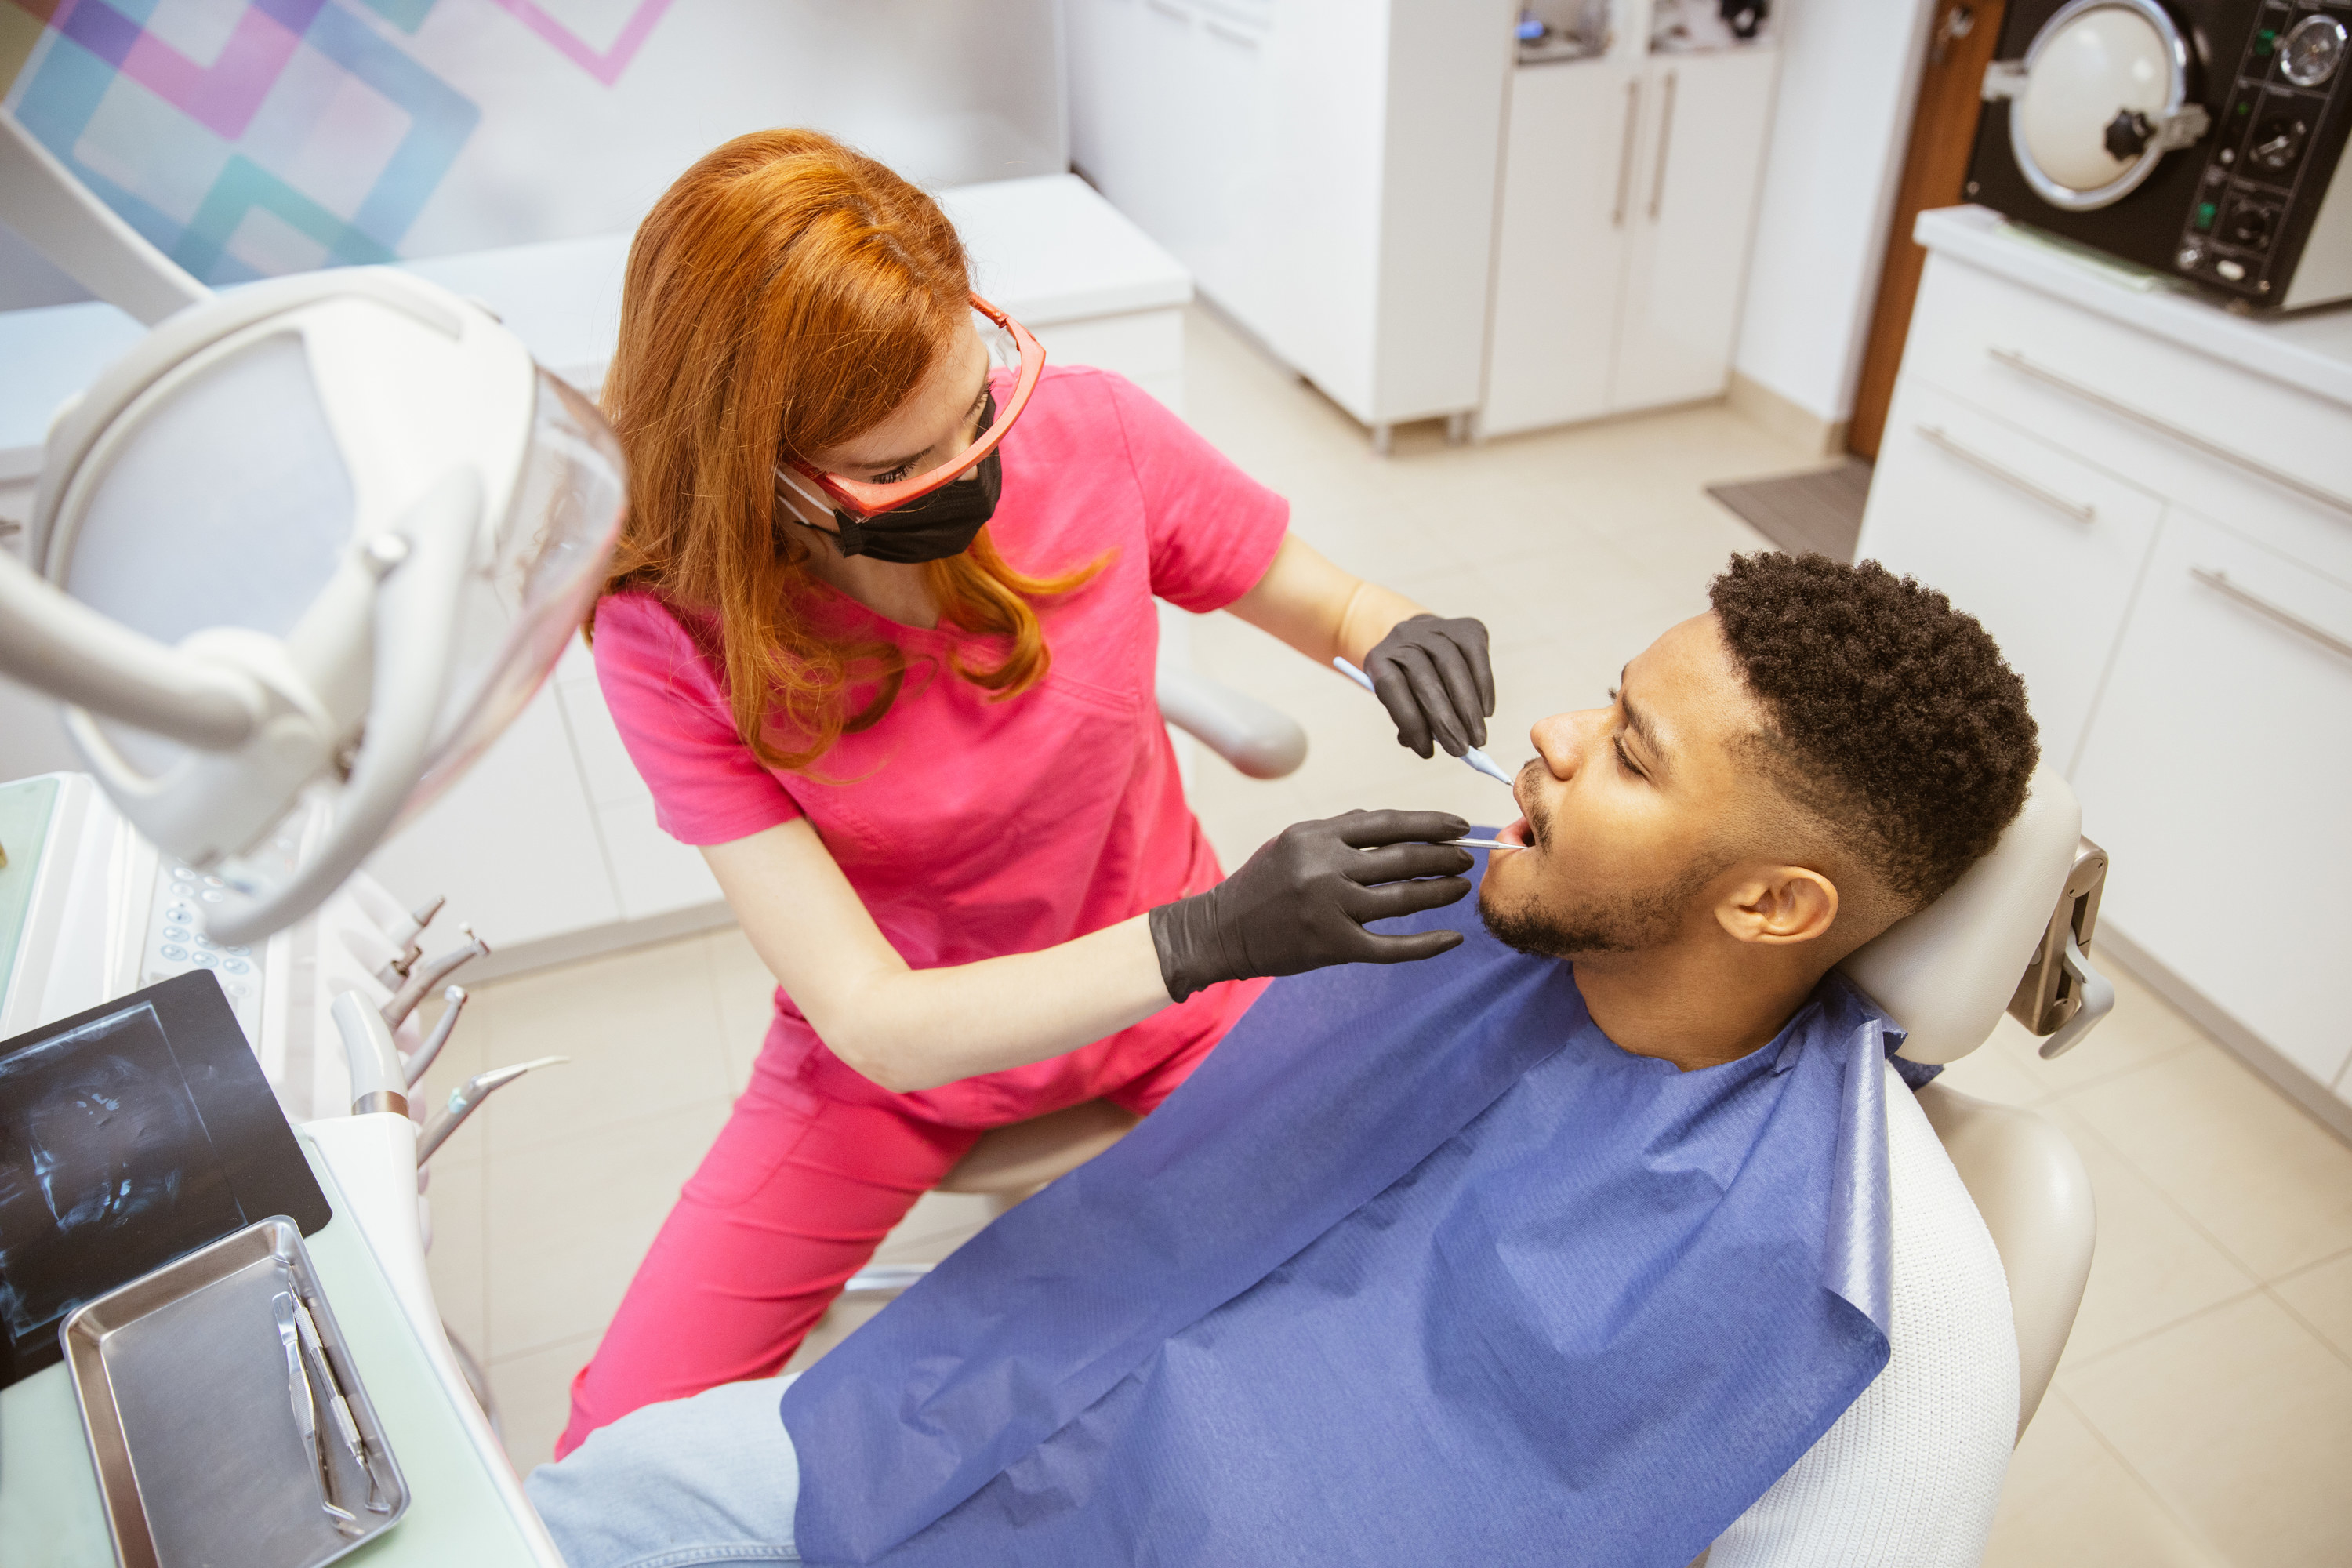 Dental hygienist working with a client wearing a blue bib